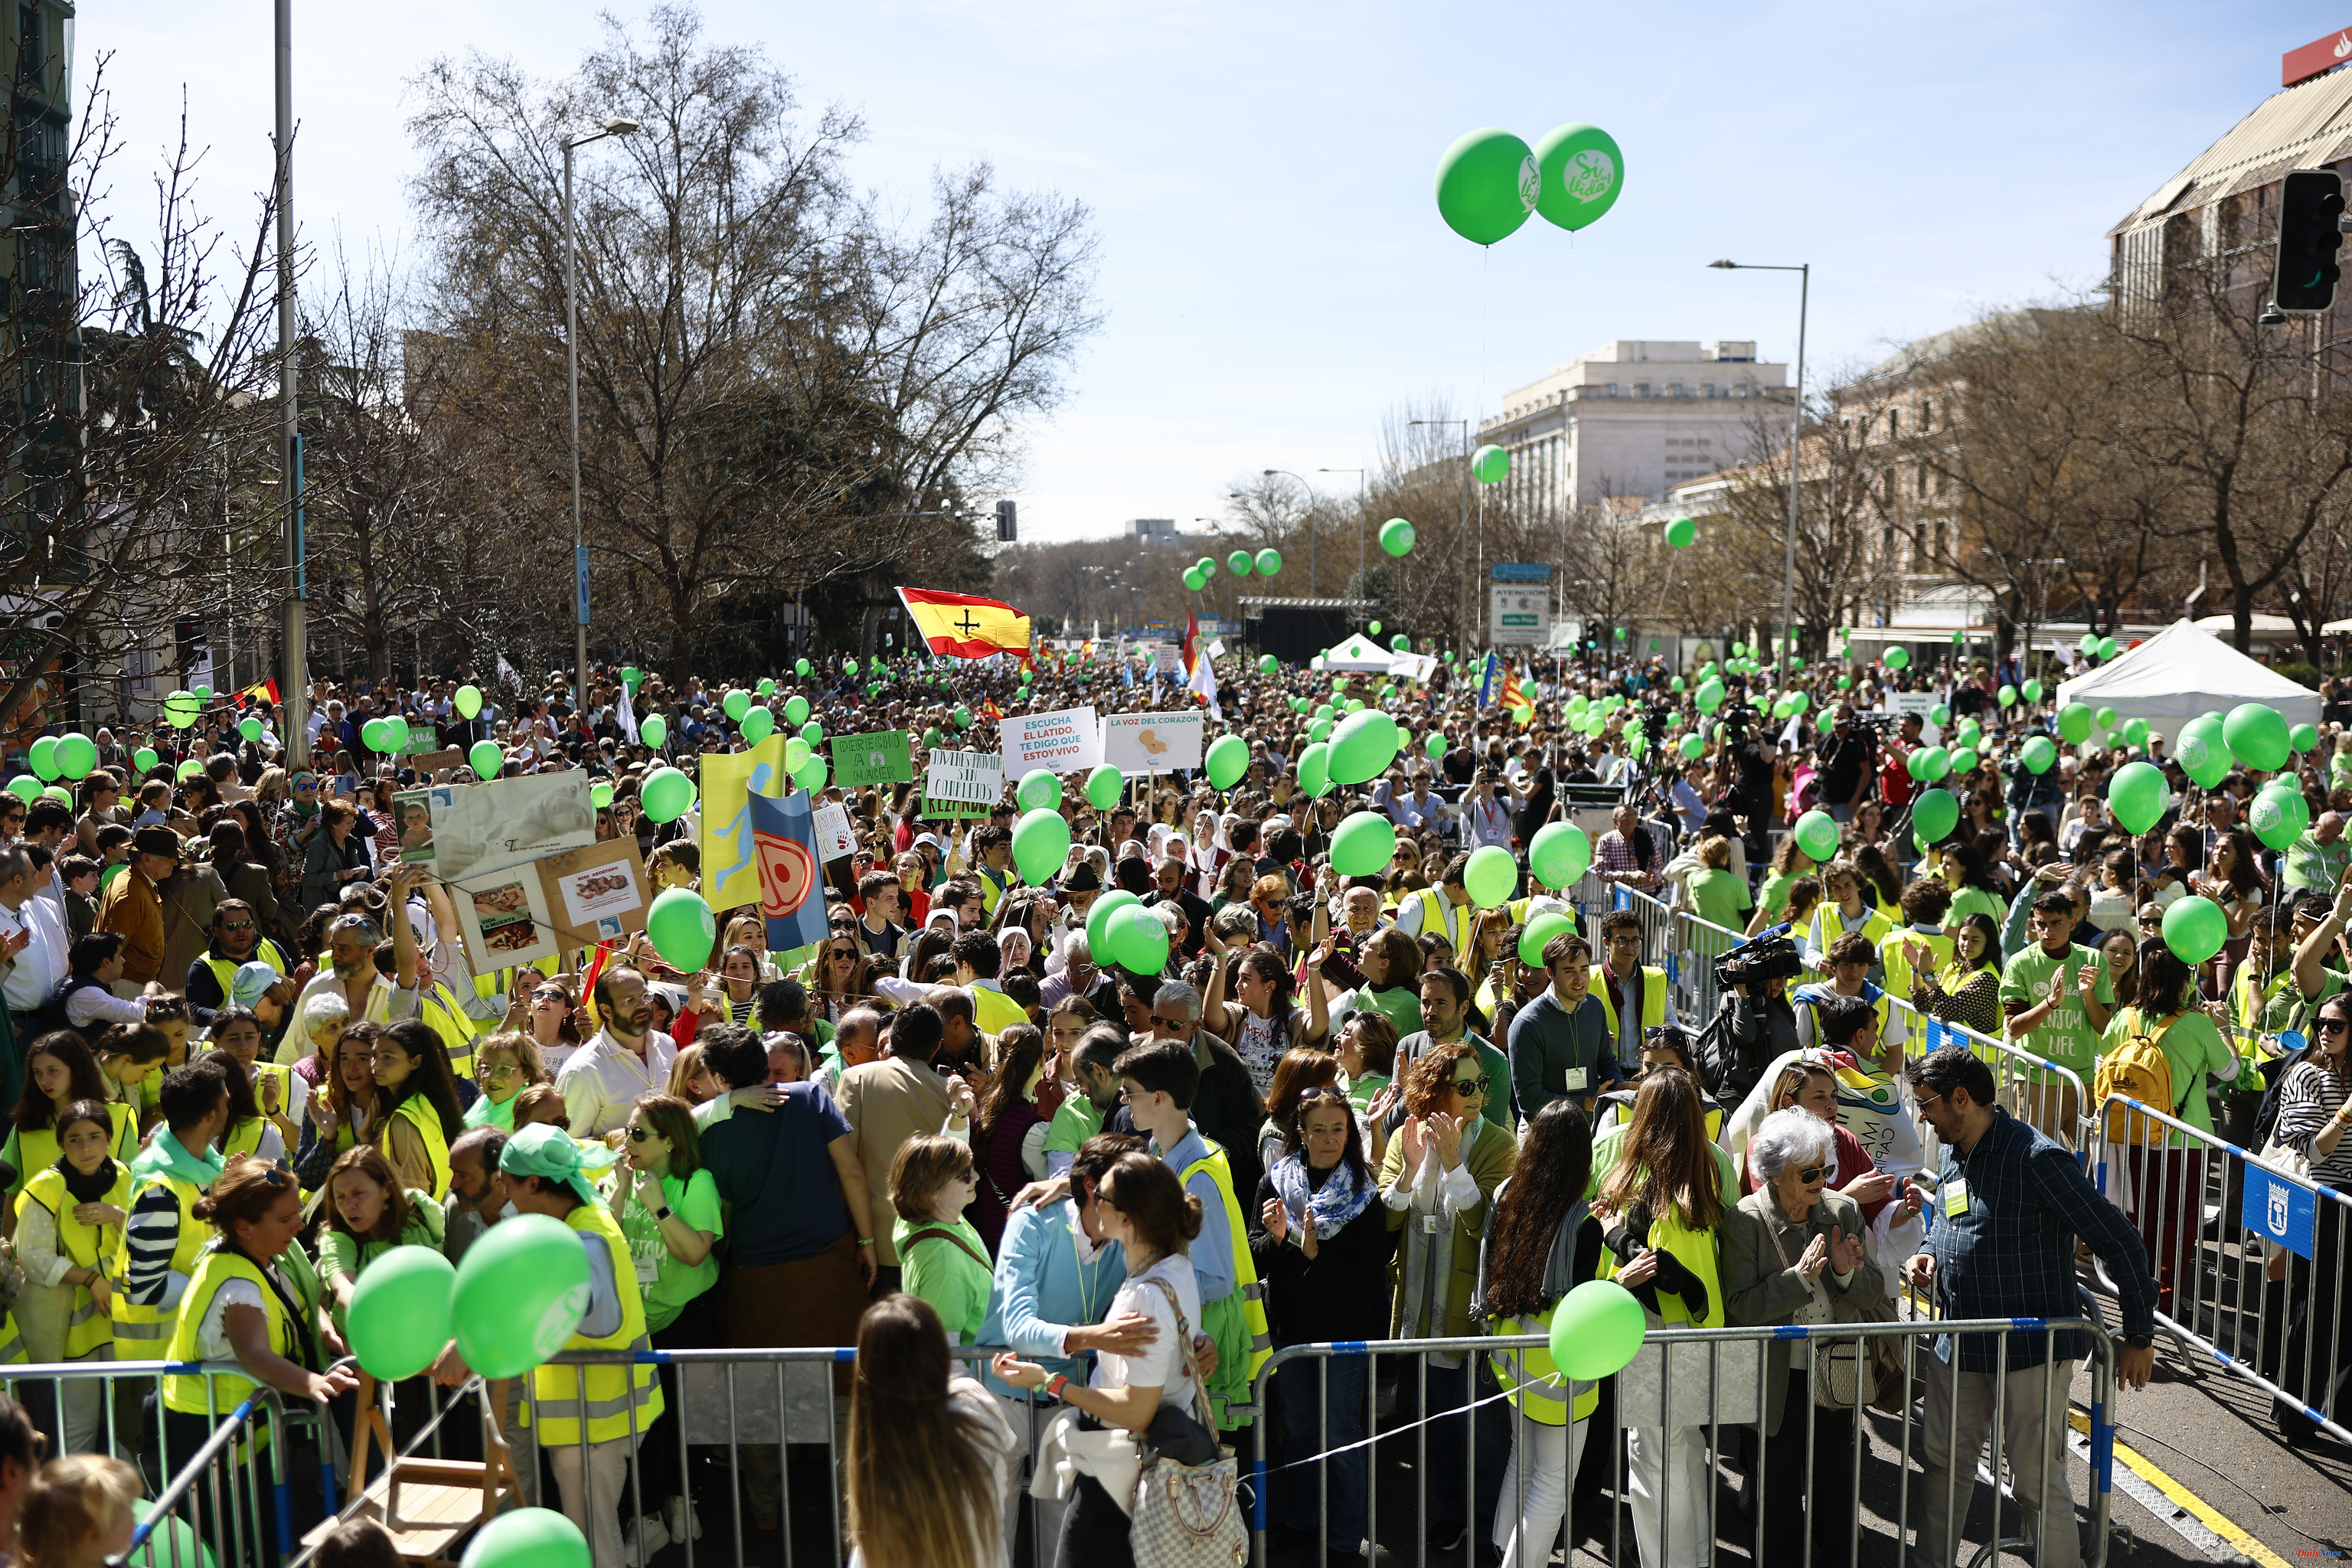 Society Thousands of people demonstrate in Madrid against abortion